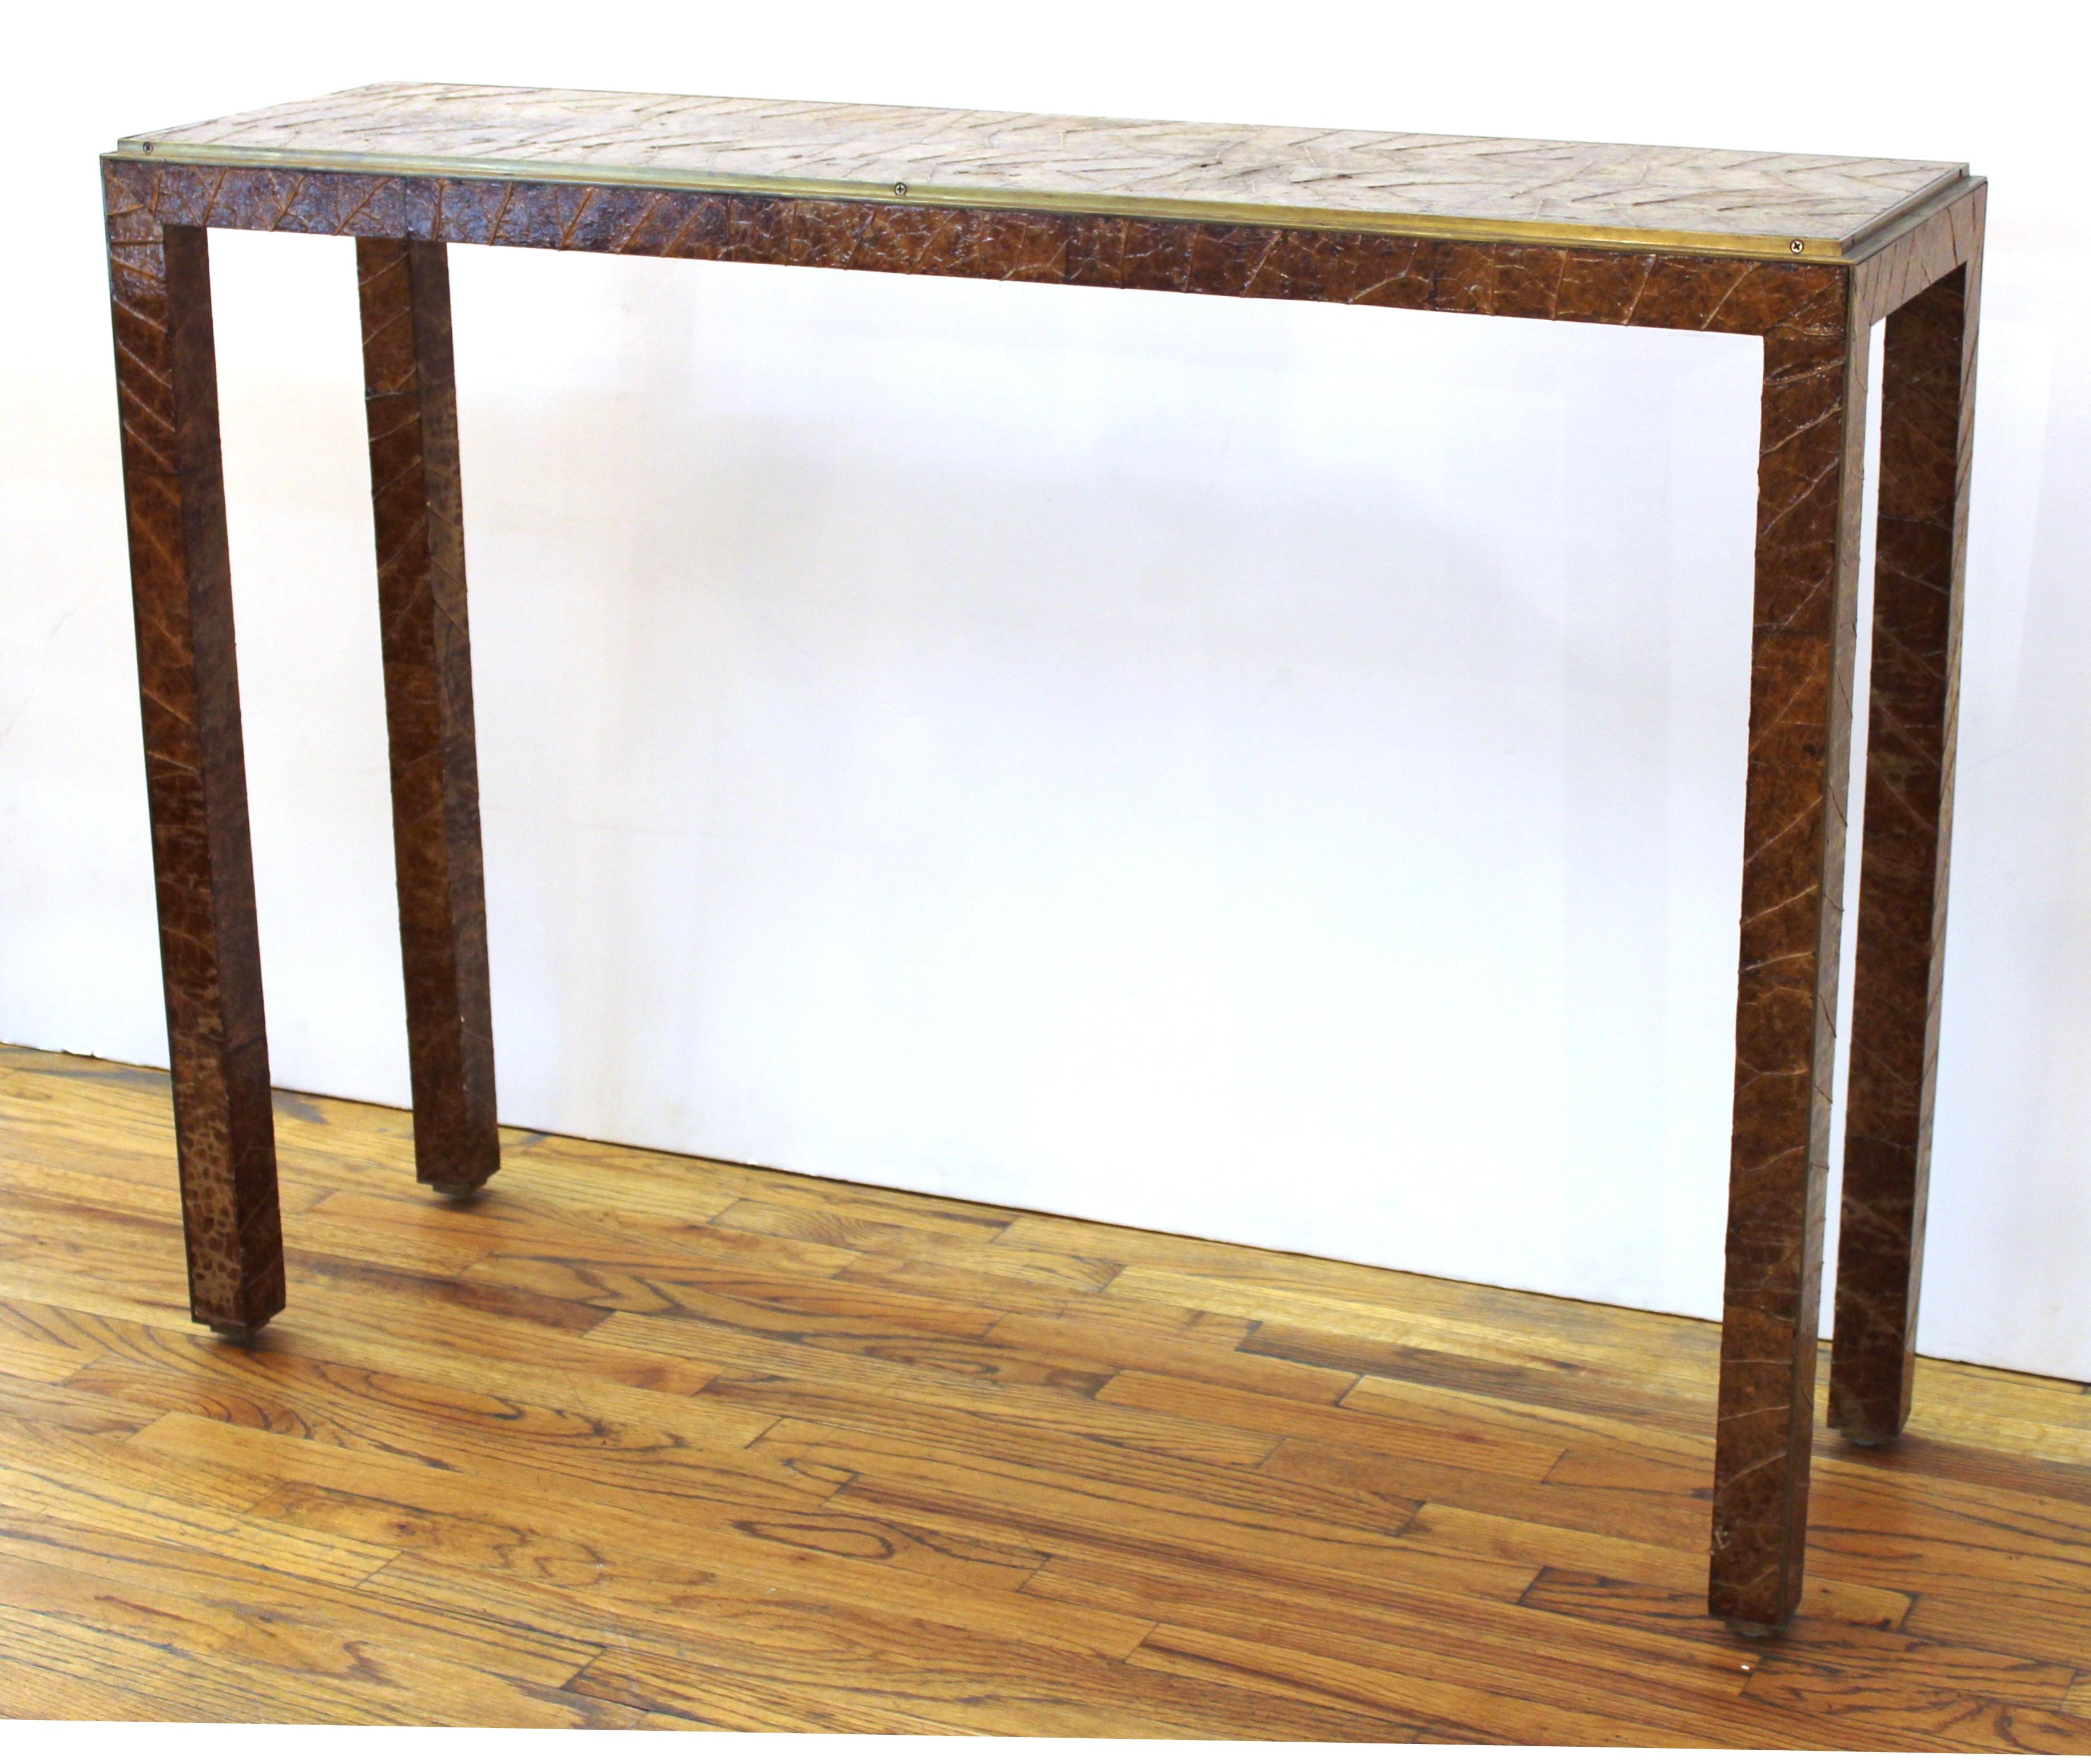 Garrison Rousseau modern console table with applied tobacco leaves surface on top and legs. Makers plaque embedded on the bottom. Some restoration work to leaves layer on the top.